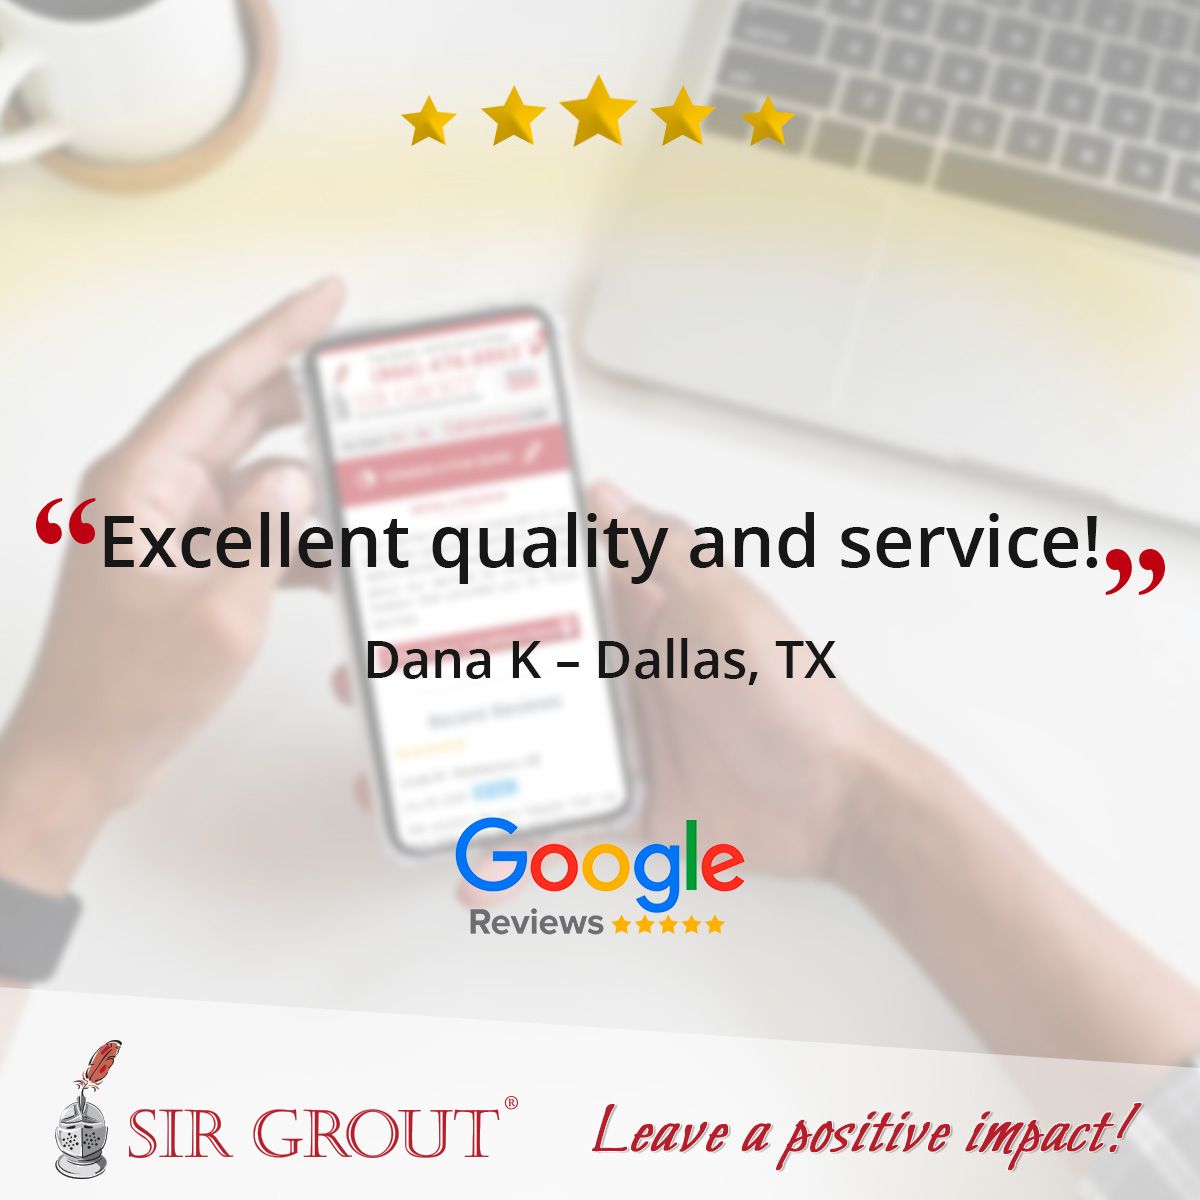 Excellent quality and service!